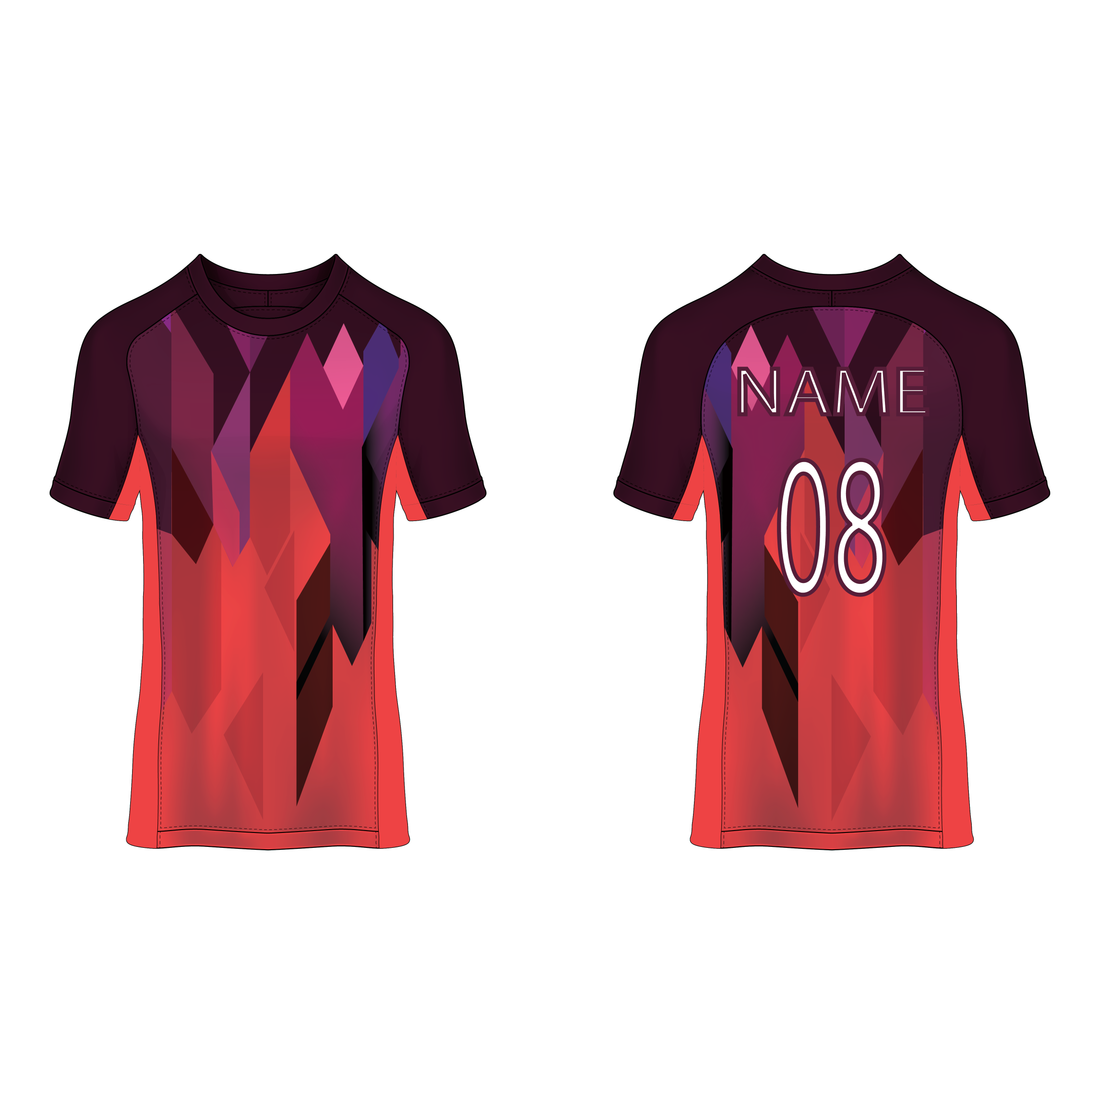 NEXT PRINT All Over Printed Customized Sublimation T-Shirt Unisex Sports Jersey Player Name & Number, Team Name NP50000259